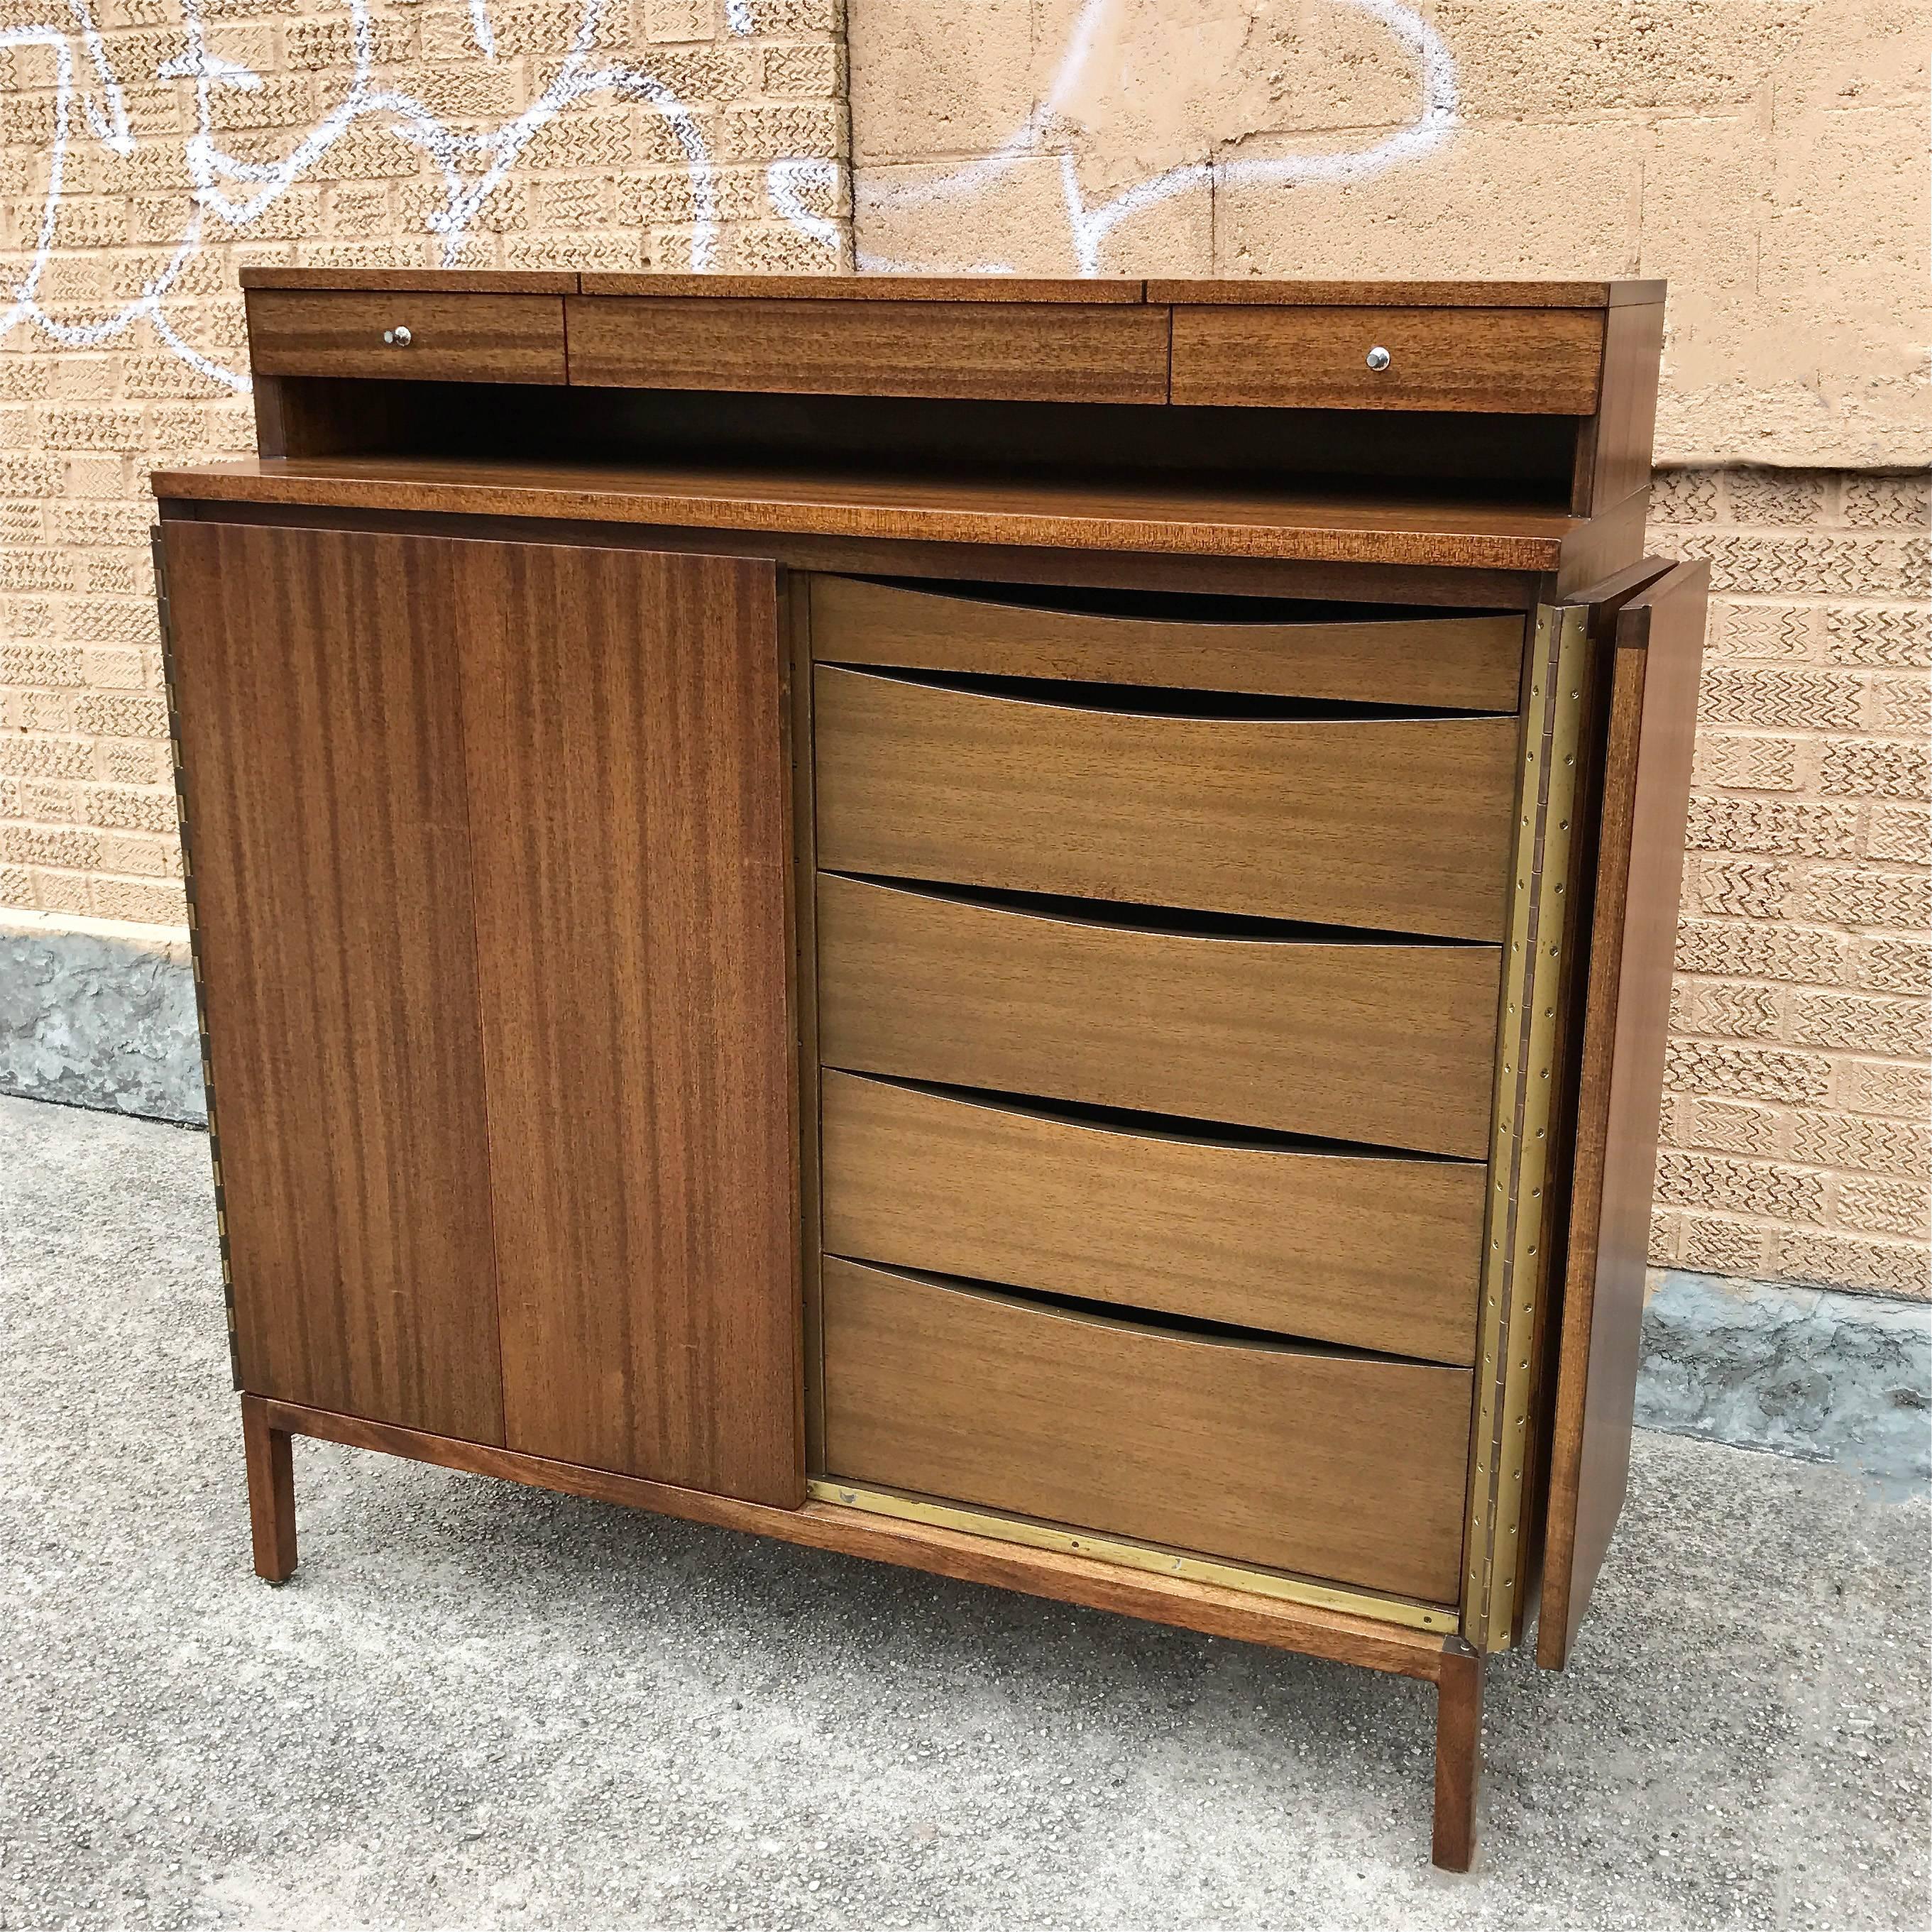 American Tall Gentleman's Chest Dresser by Paul McCobb for Calvin the Irwin Collection